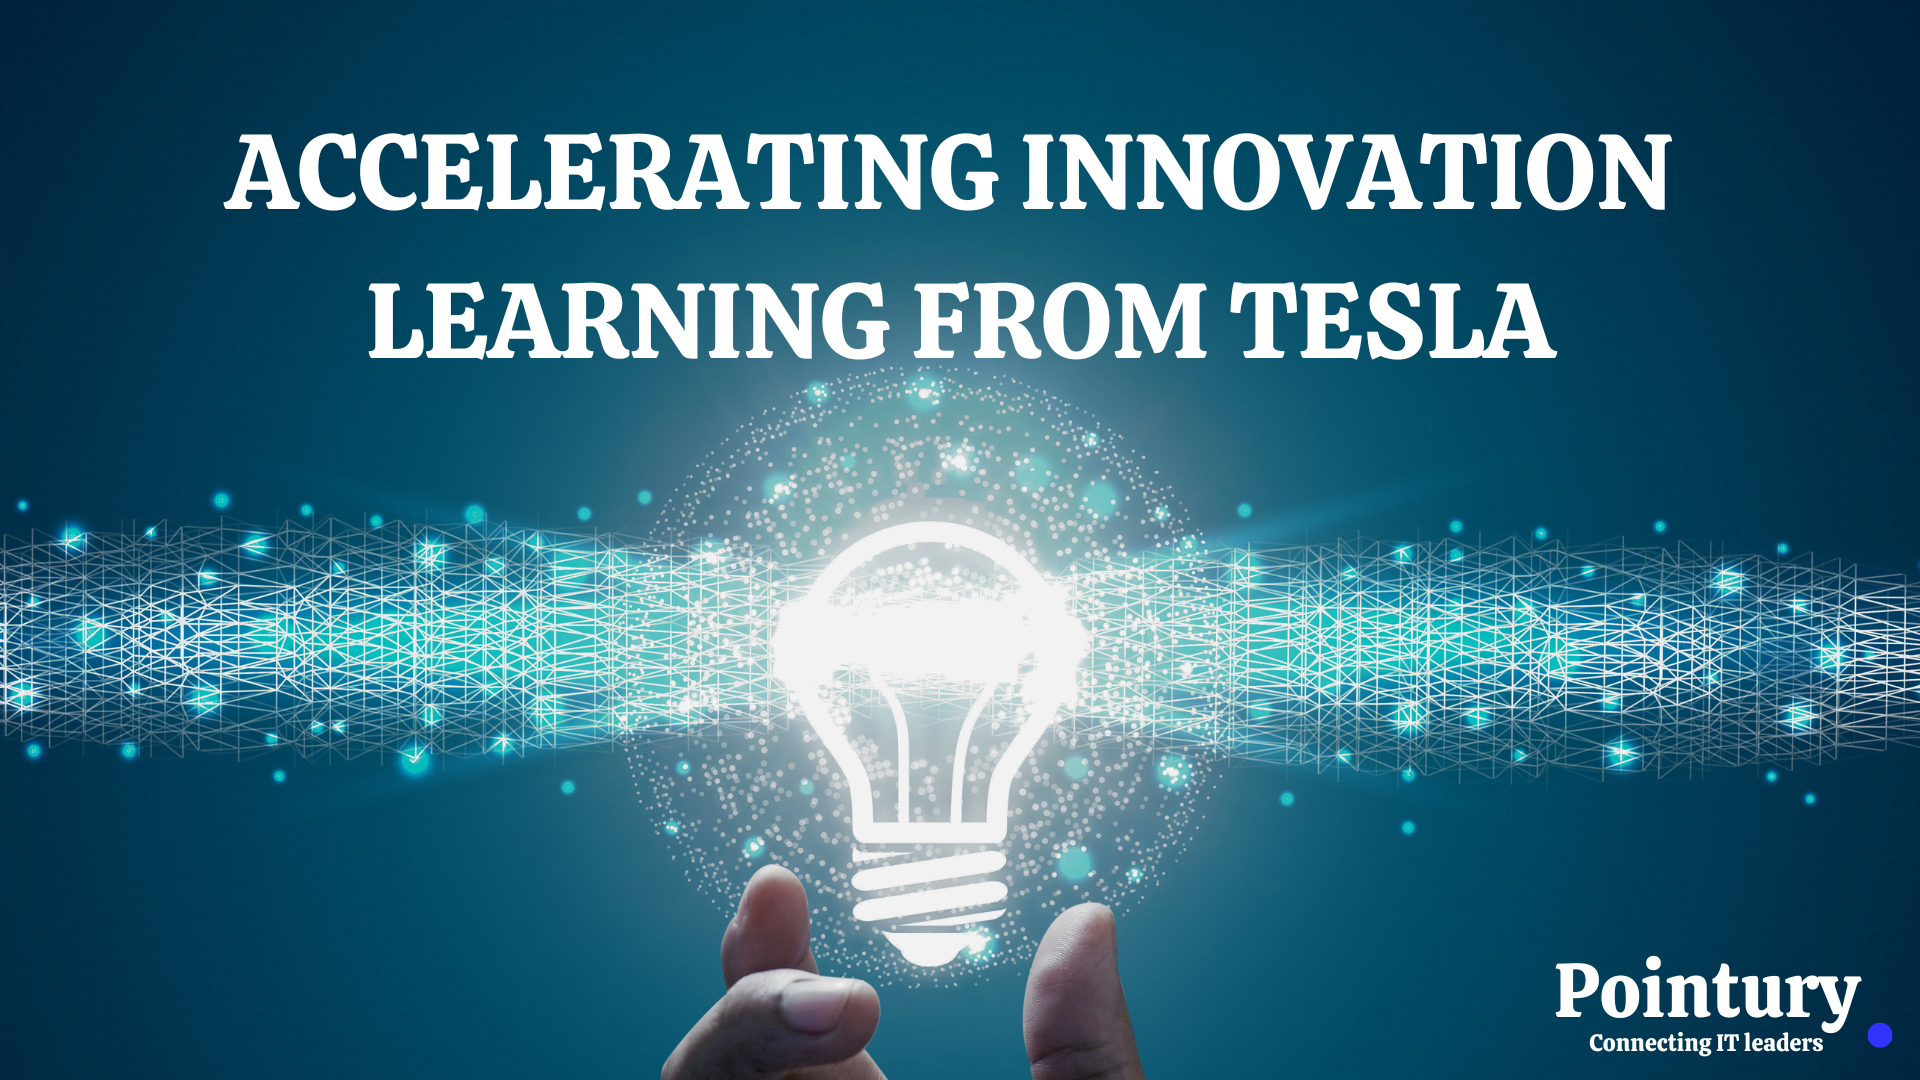 ACCELERATING INNOVATION: Learning FROM TESLA